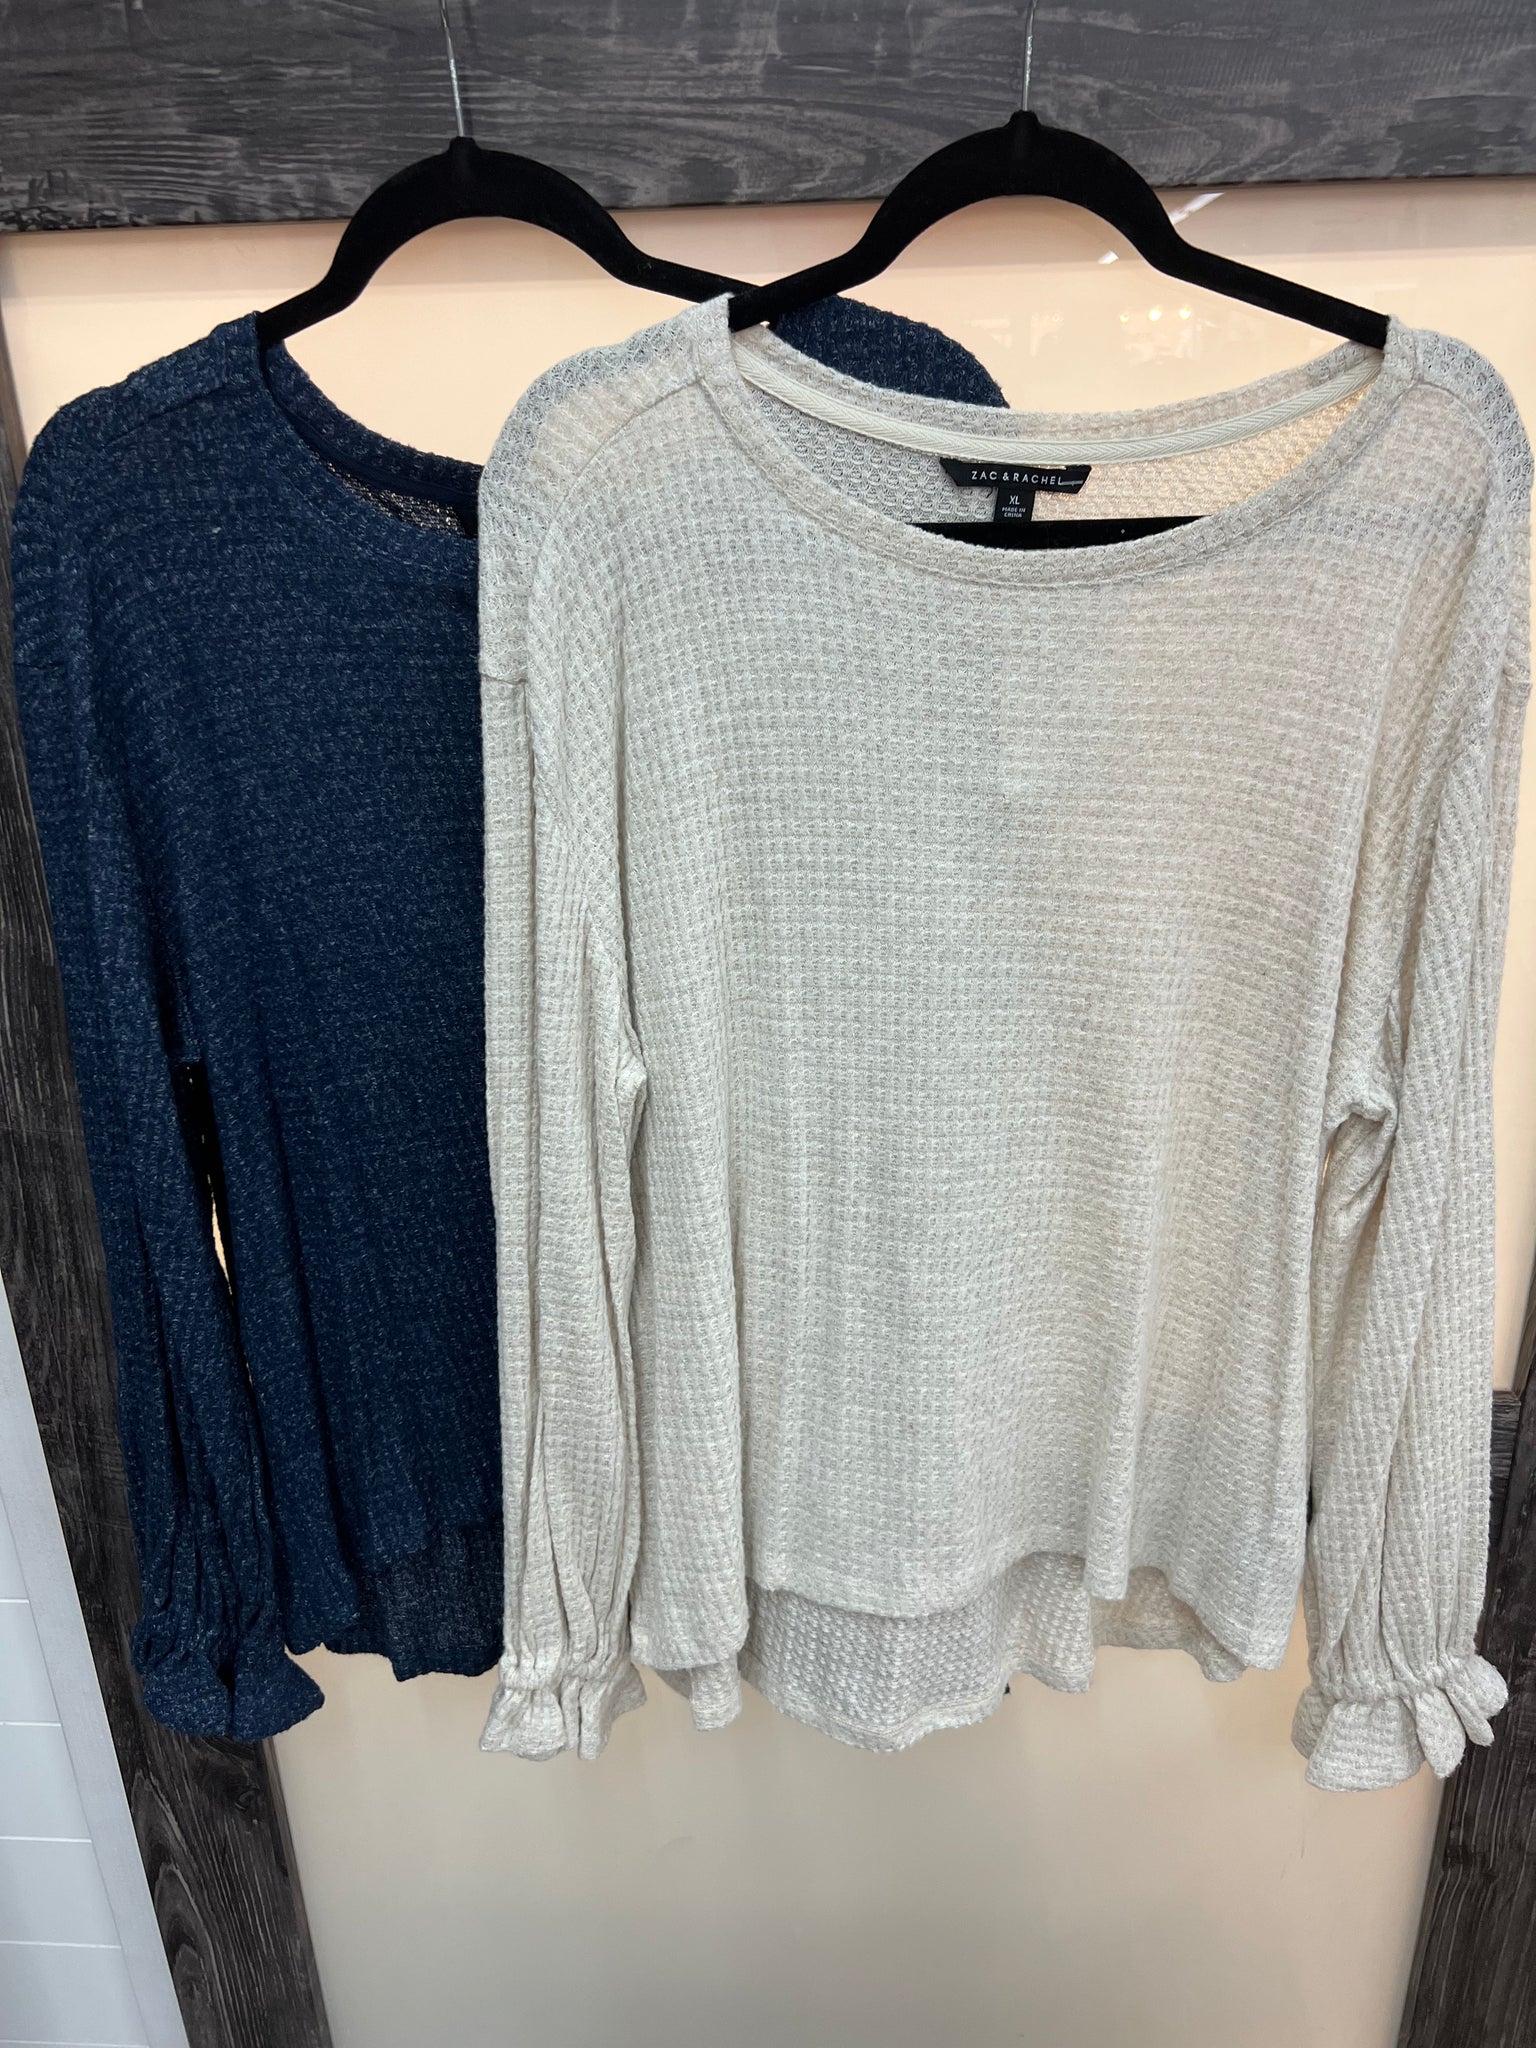 Brittany Waffle Knit Top